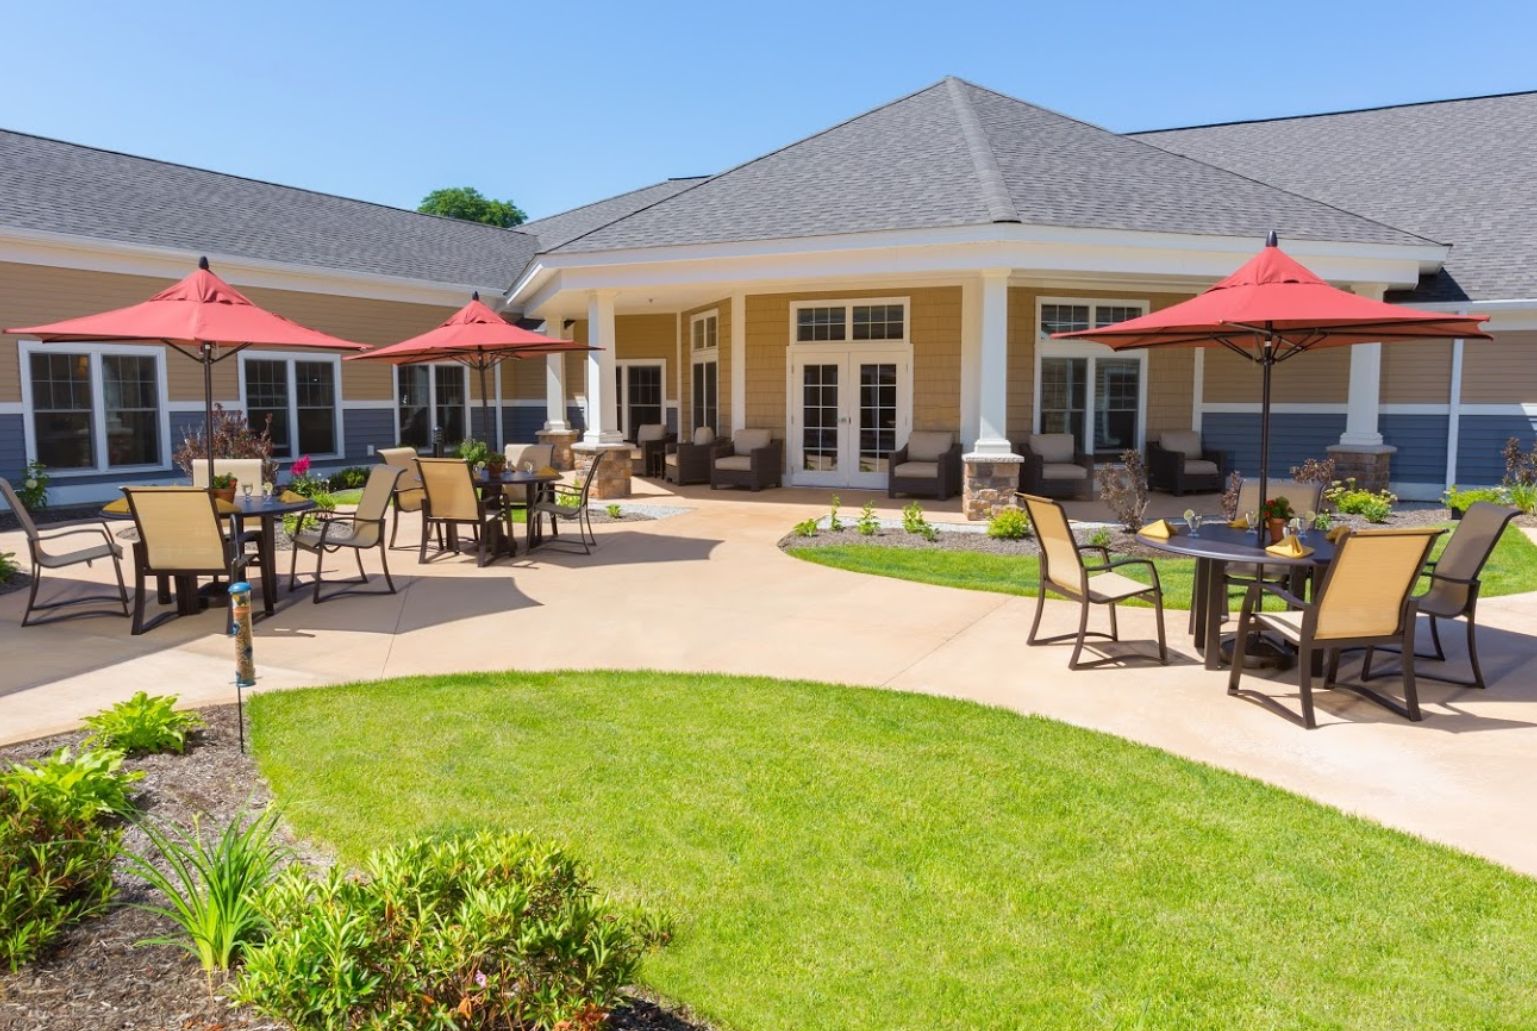 Senior living community, Cornerstone at Milford, featuring lush lawns, patio dining, and modern architecture.